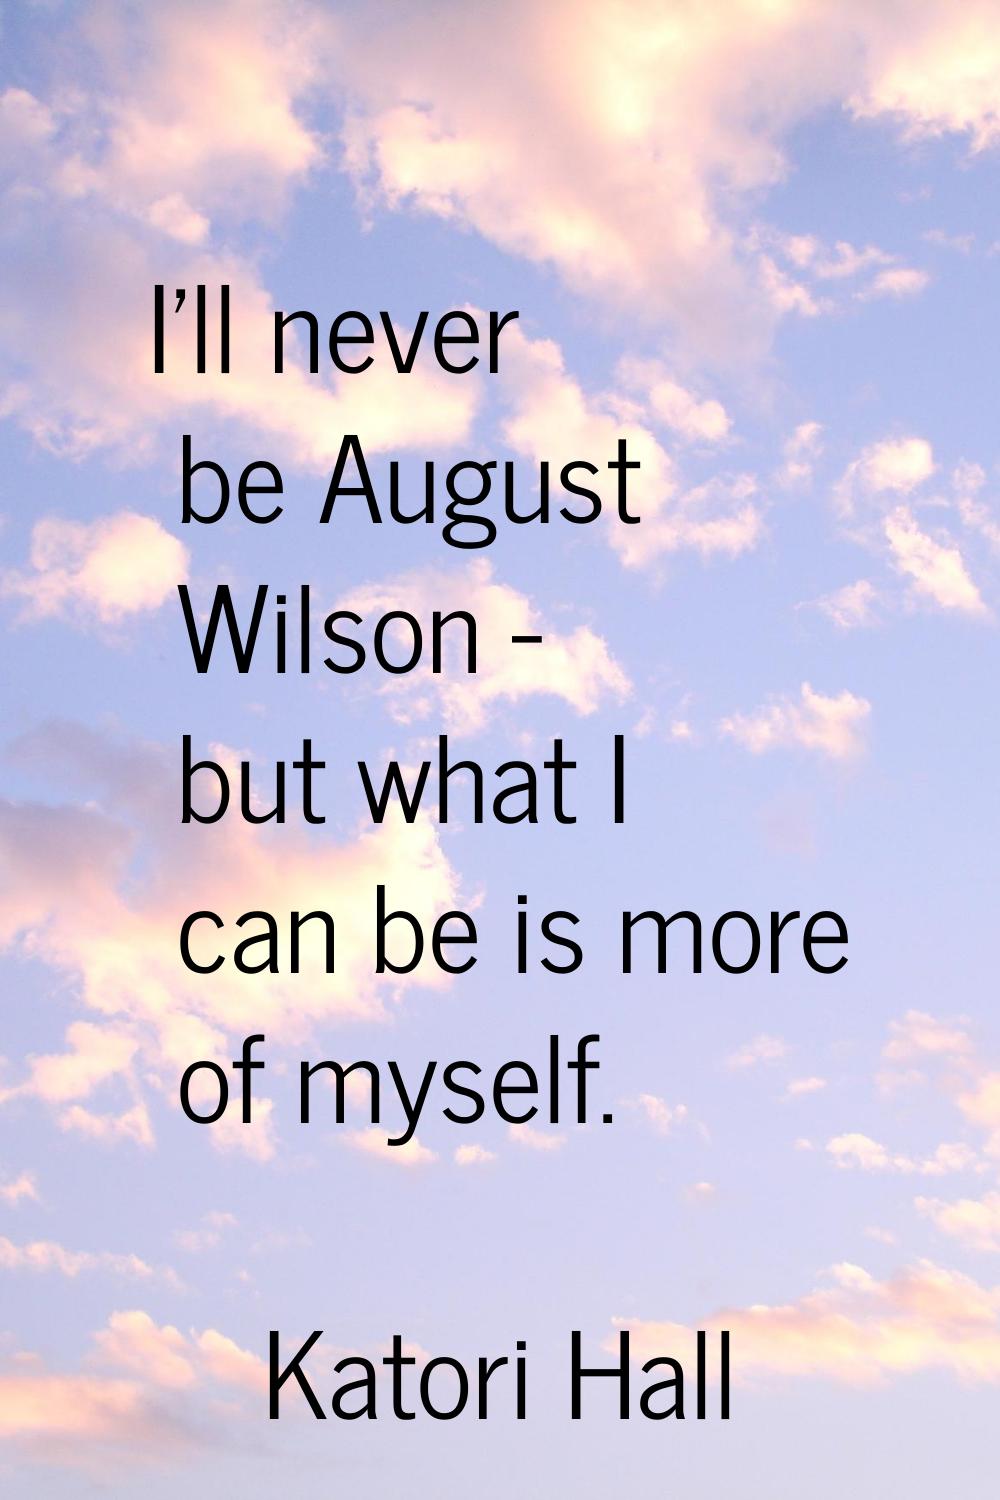 I'll never be August Wilson - but what I can be is more of myself.